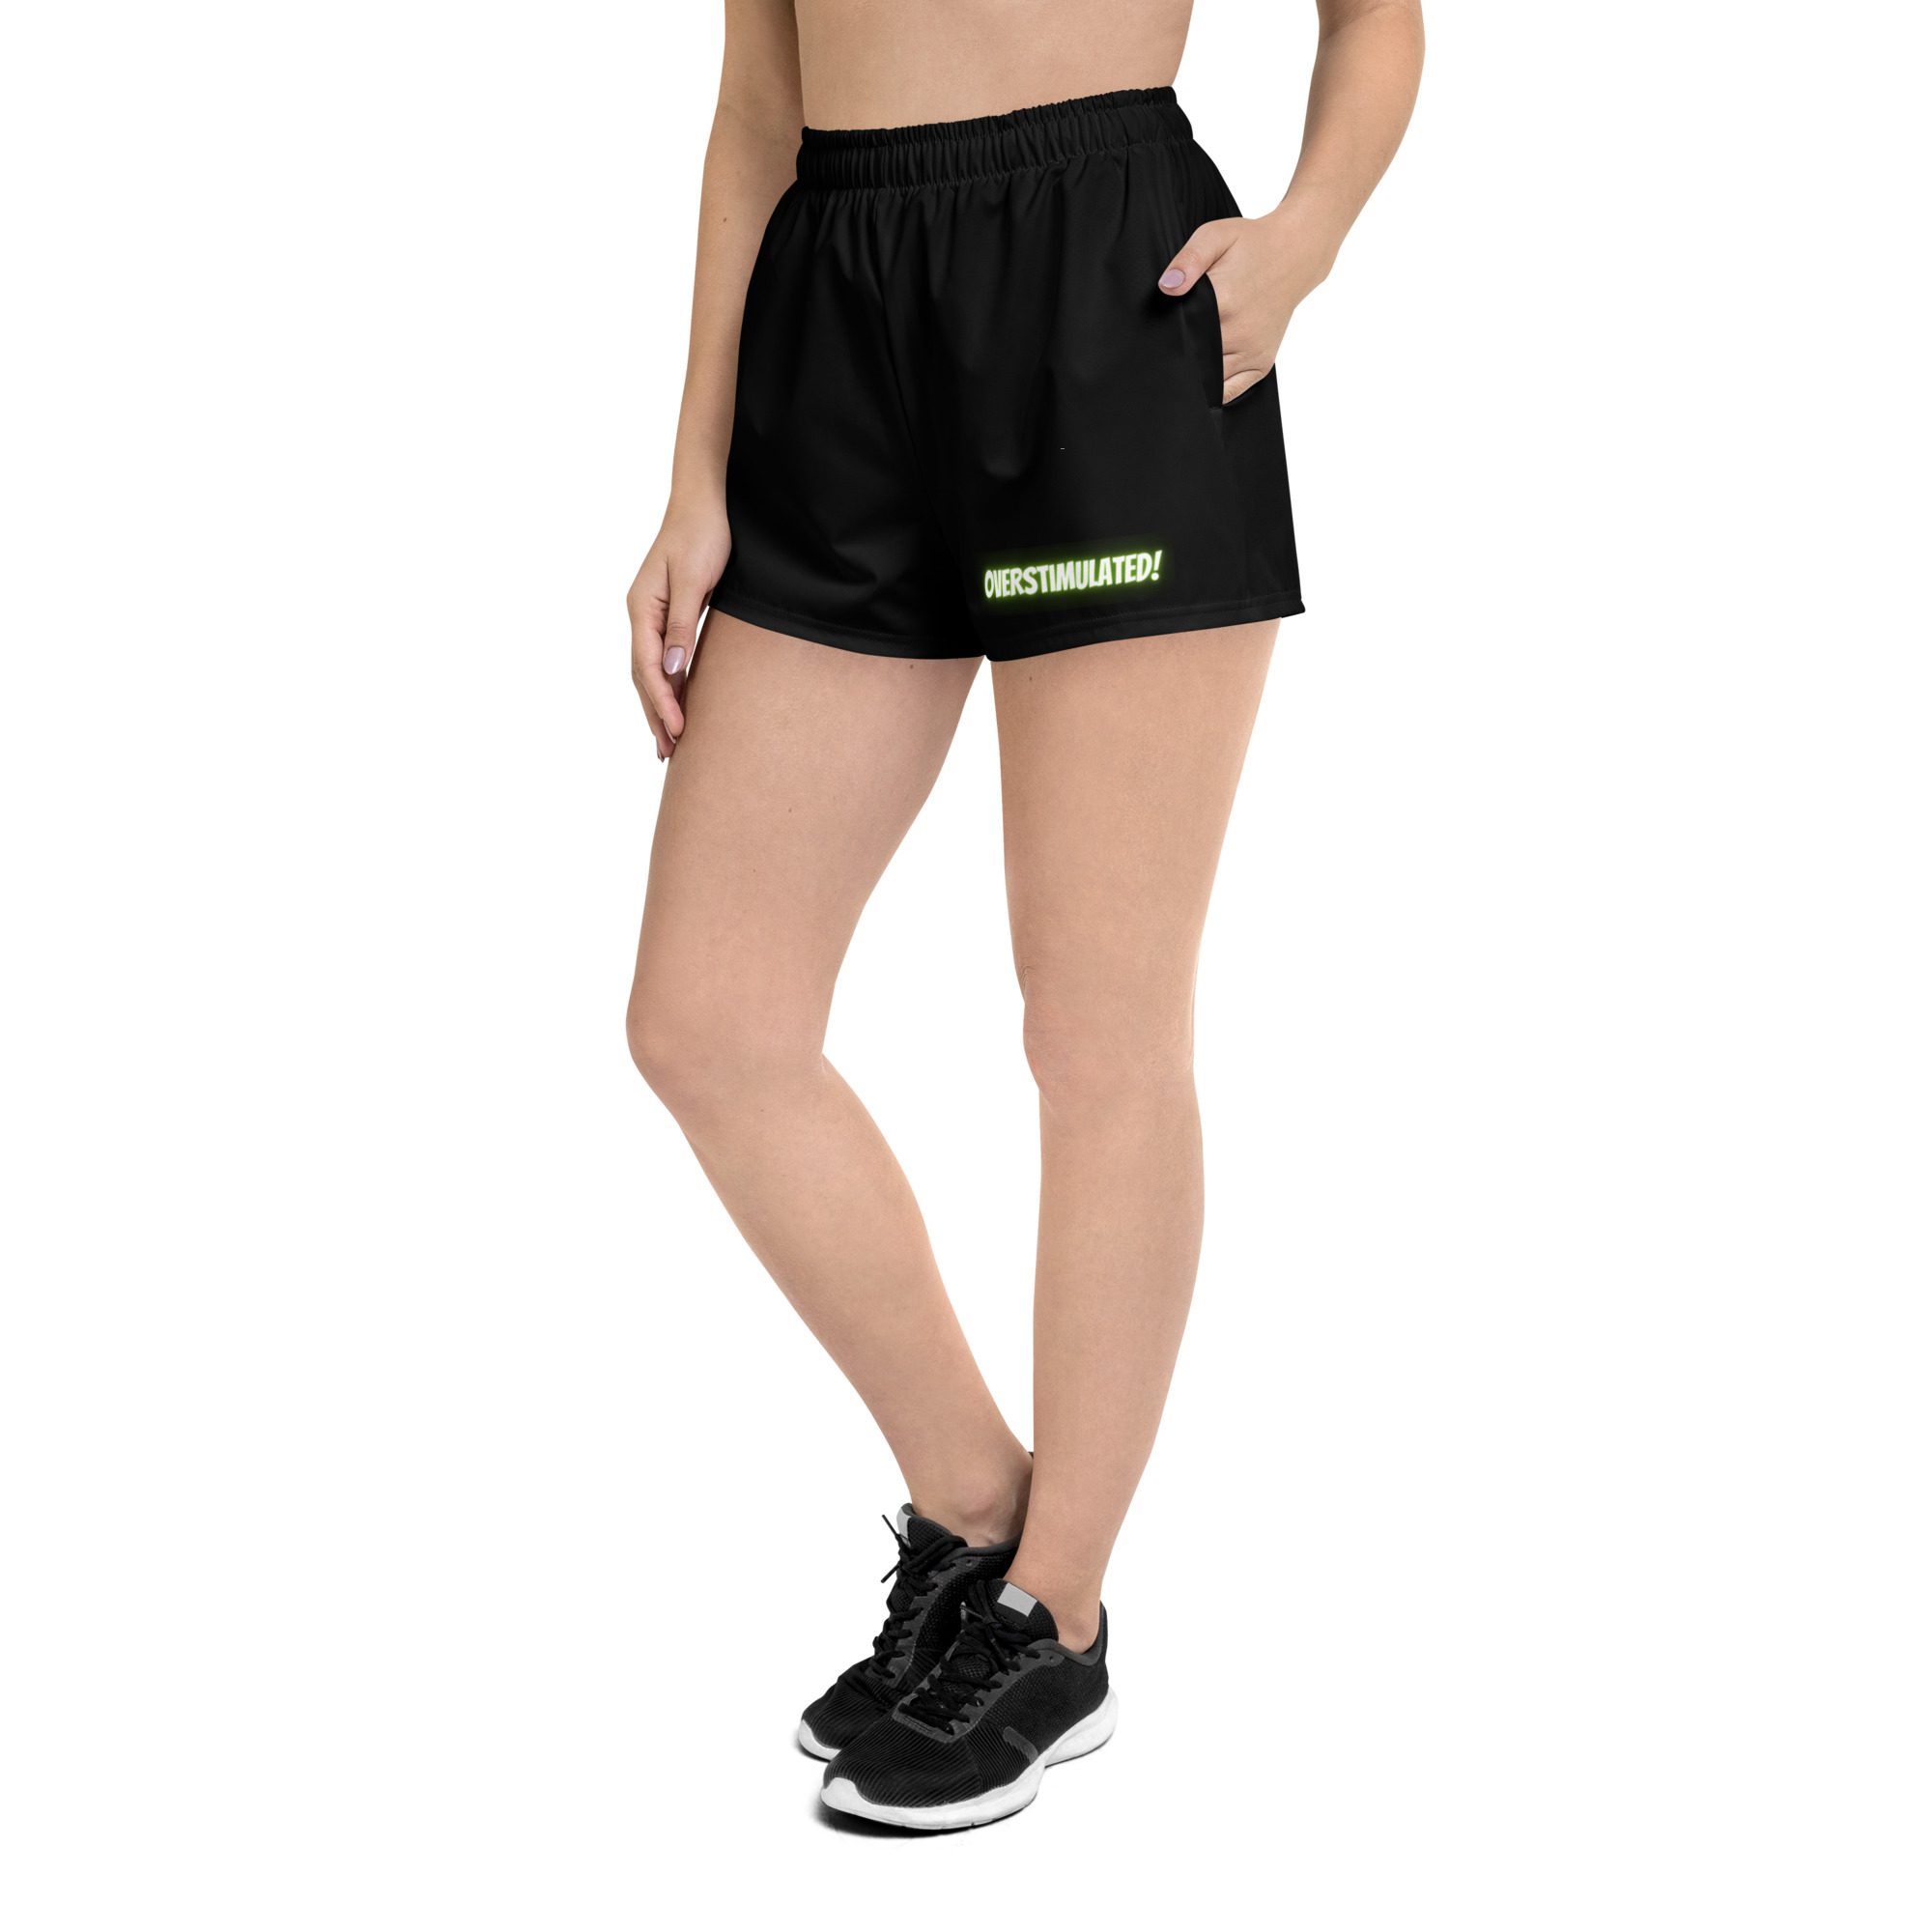 OVERSTIMULATED! Women’s Recycled Shorts